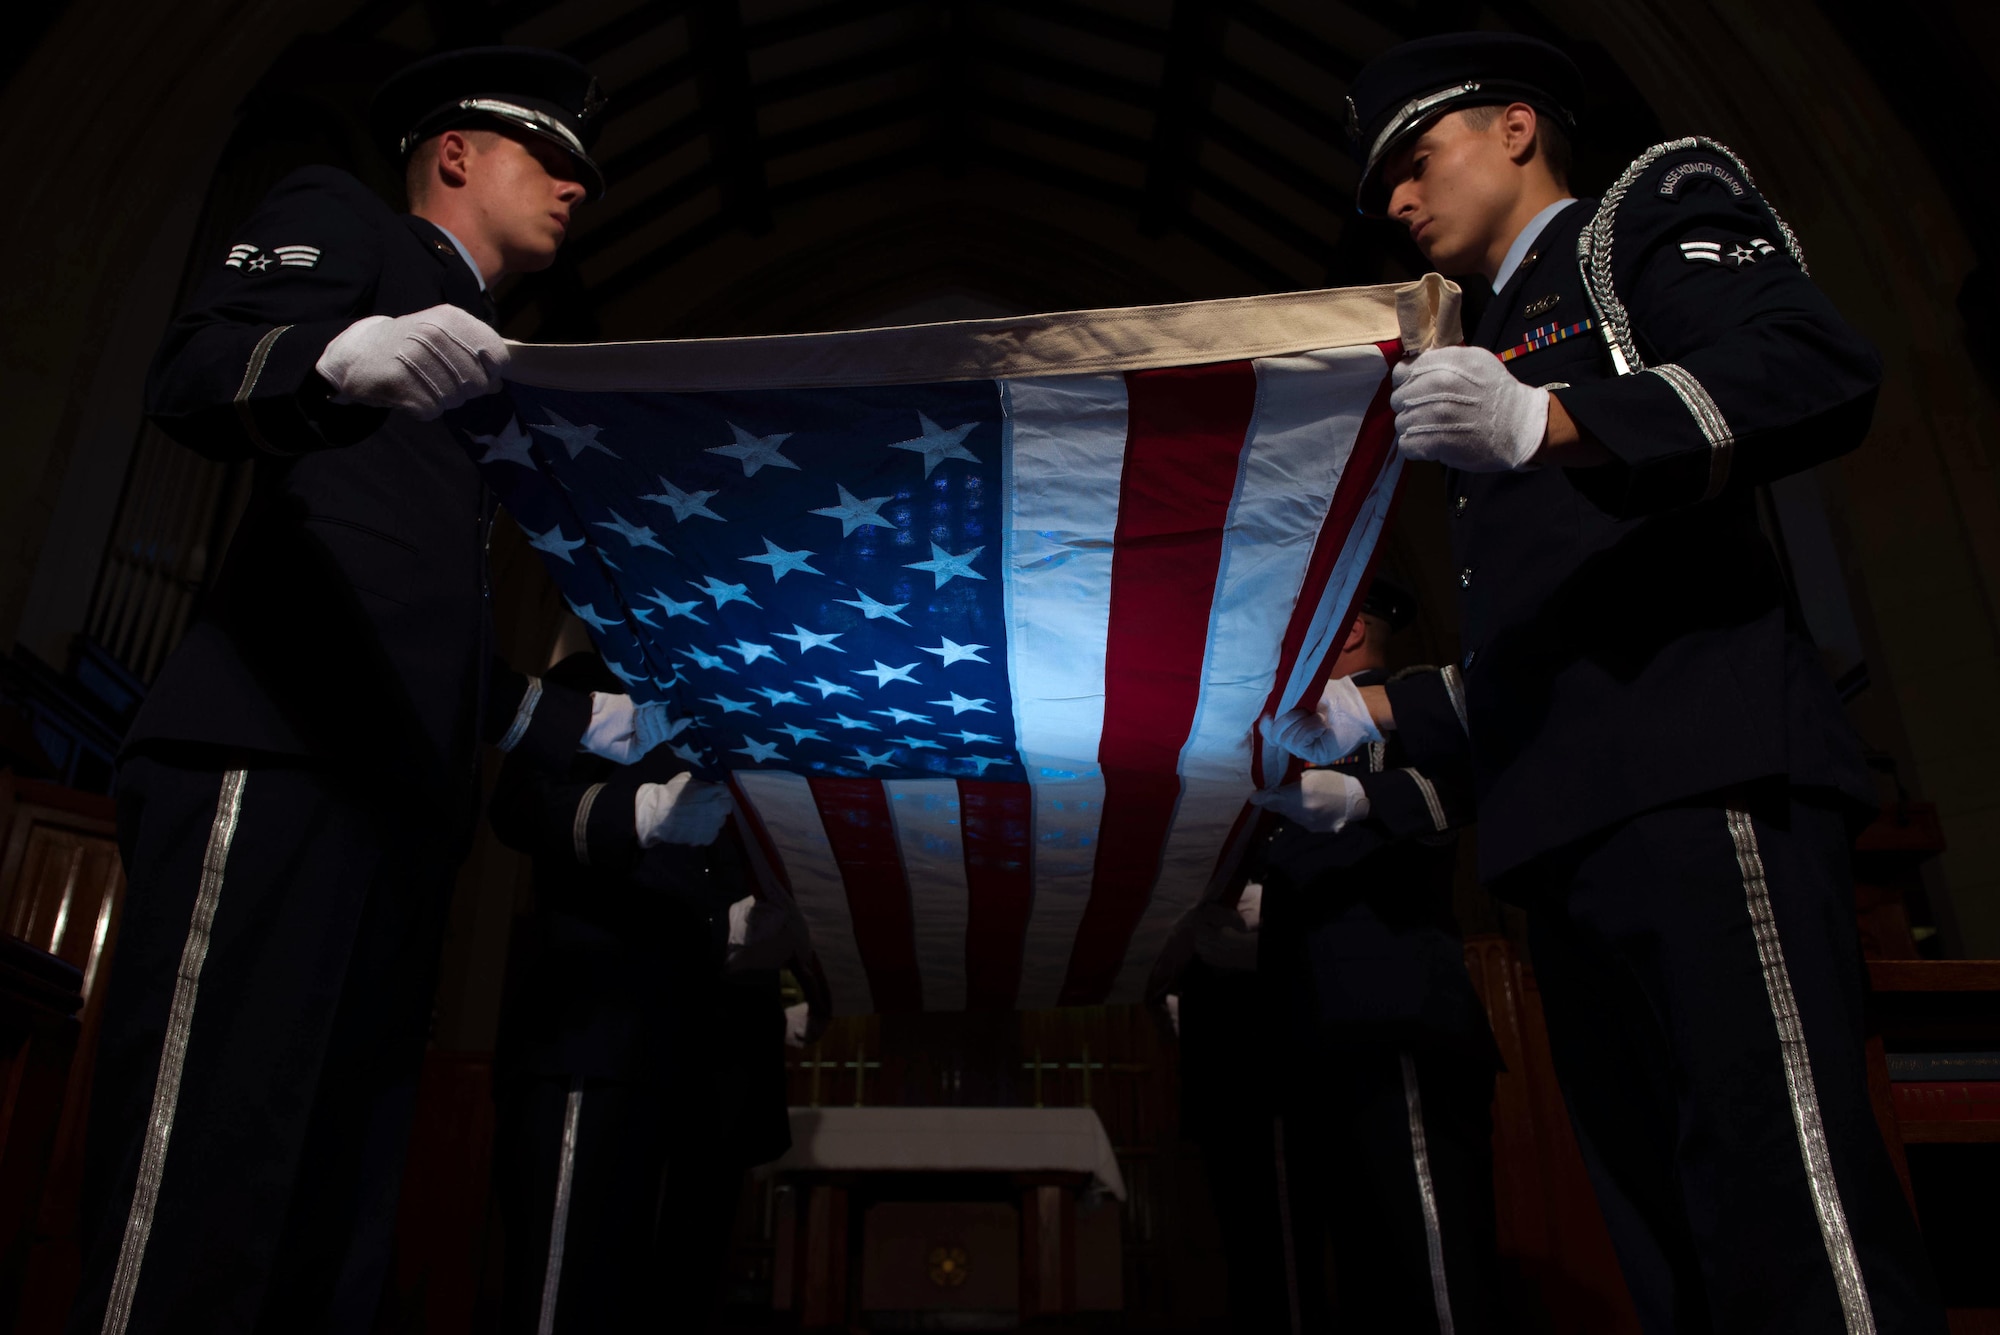 U.S. Air Force service members, assigned to the base Honor Guard, perform a flag folding ceremony at Joint Base Langley-Eustis, Va., June 12, 2017. The flag folding ceremony is a time honored tradition that is used during Memorial Day and Veterans Day ceremonies, as well as retirements from the Armed Forces. (U.S. Air Force photo/ Staff Sgt. Carlin Leslie)